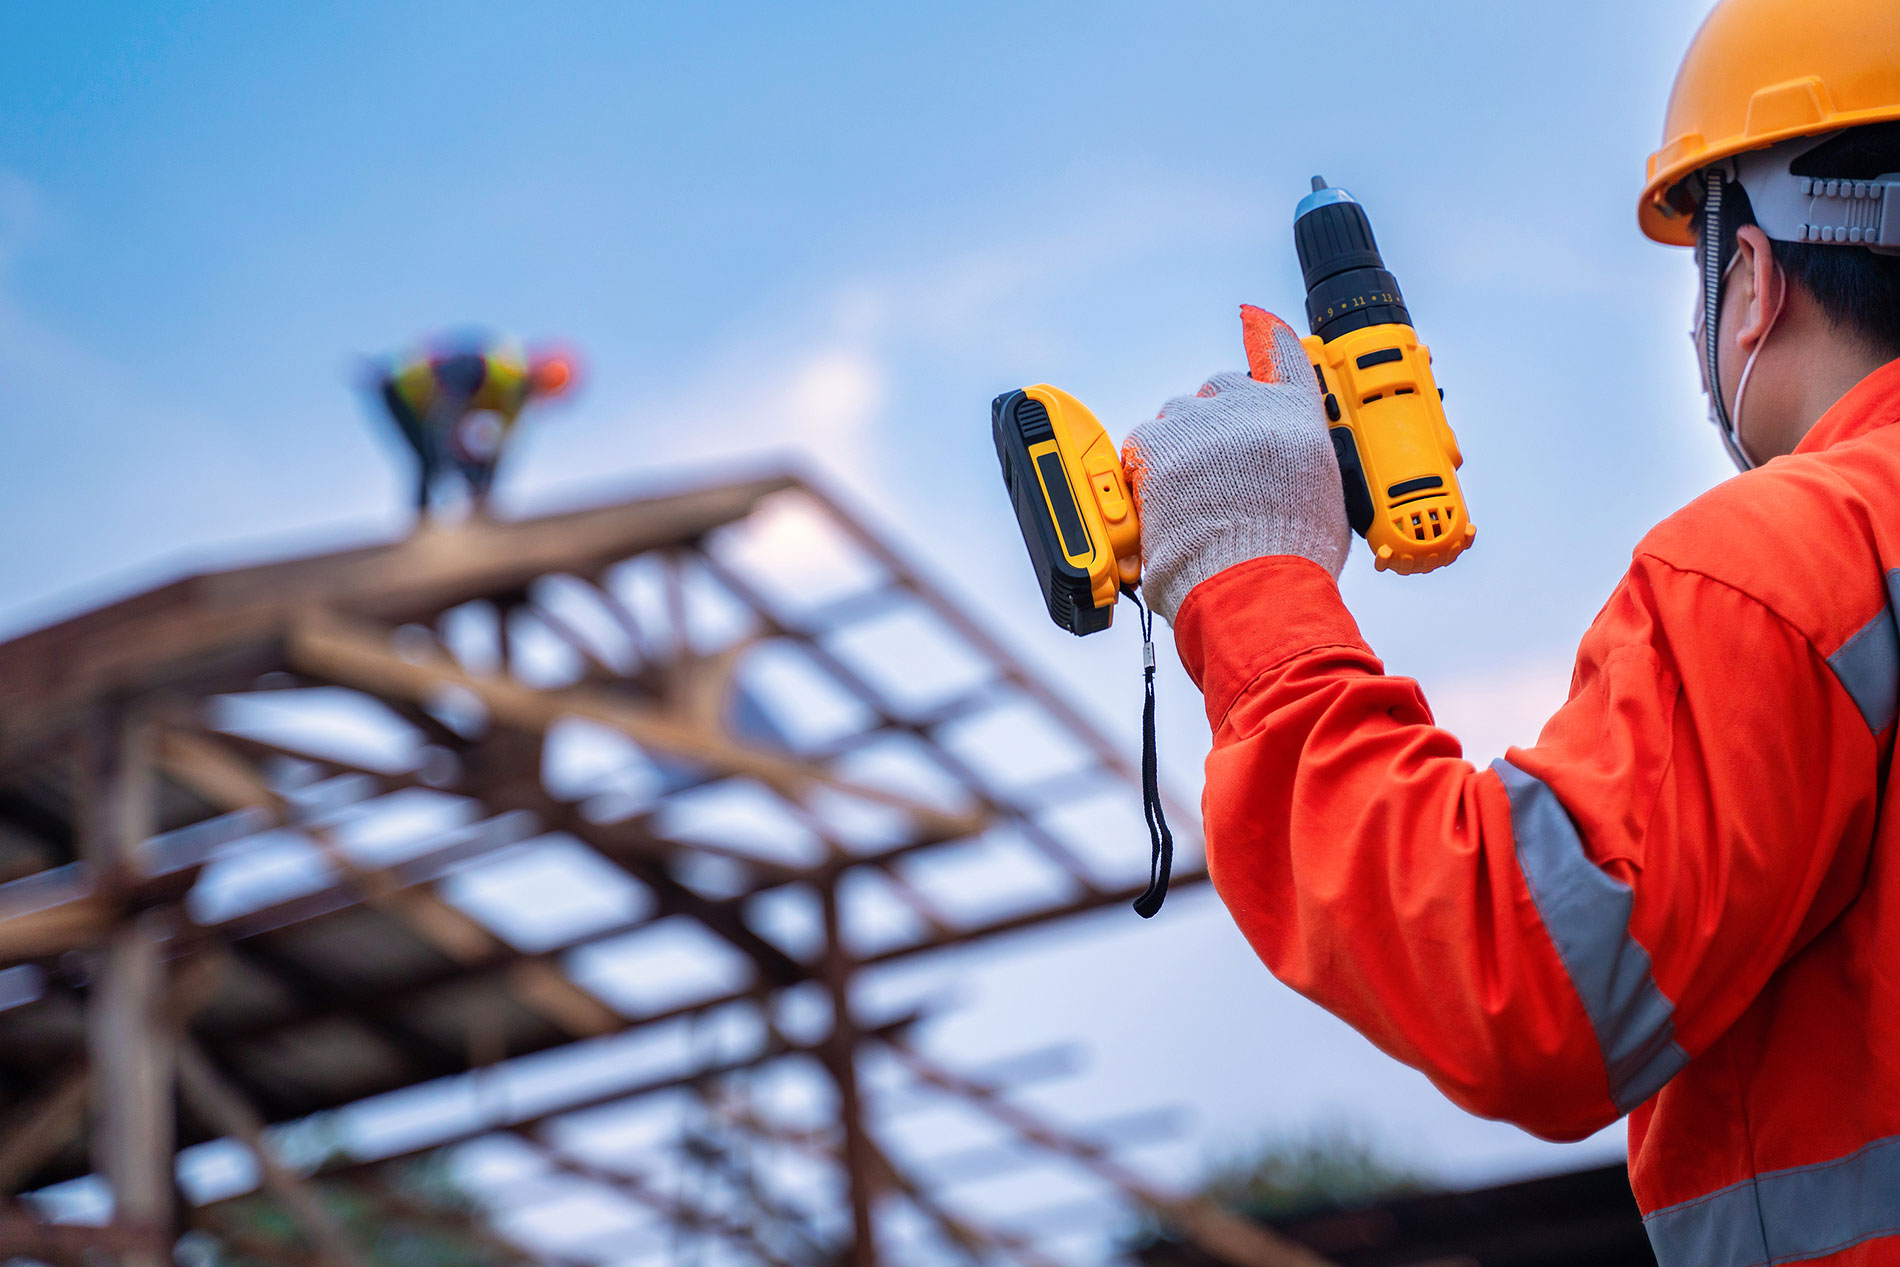 With High TBI Risks, Roofing Clients Need Strong Workers' Comp and PEO